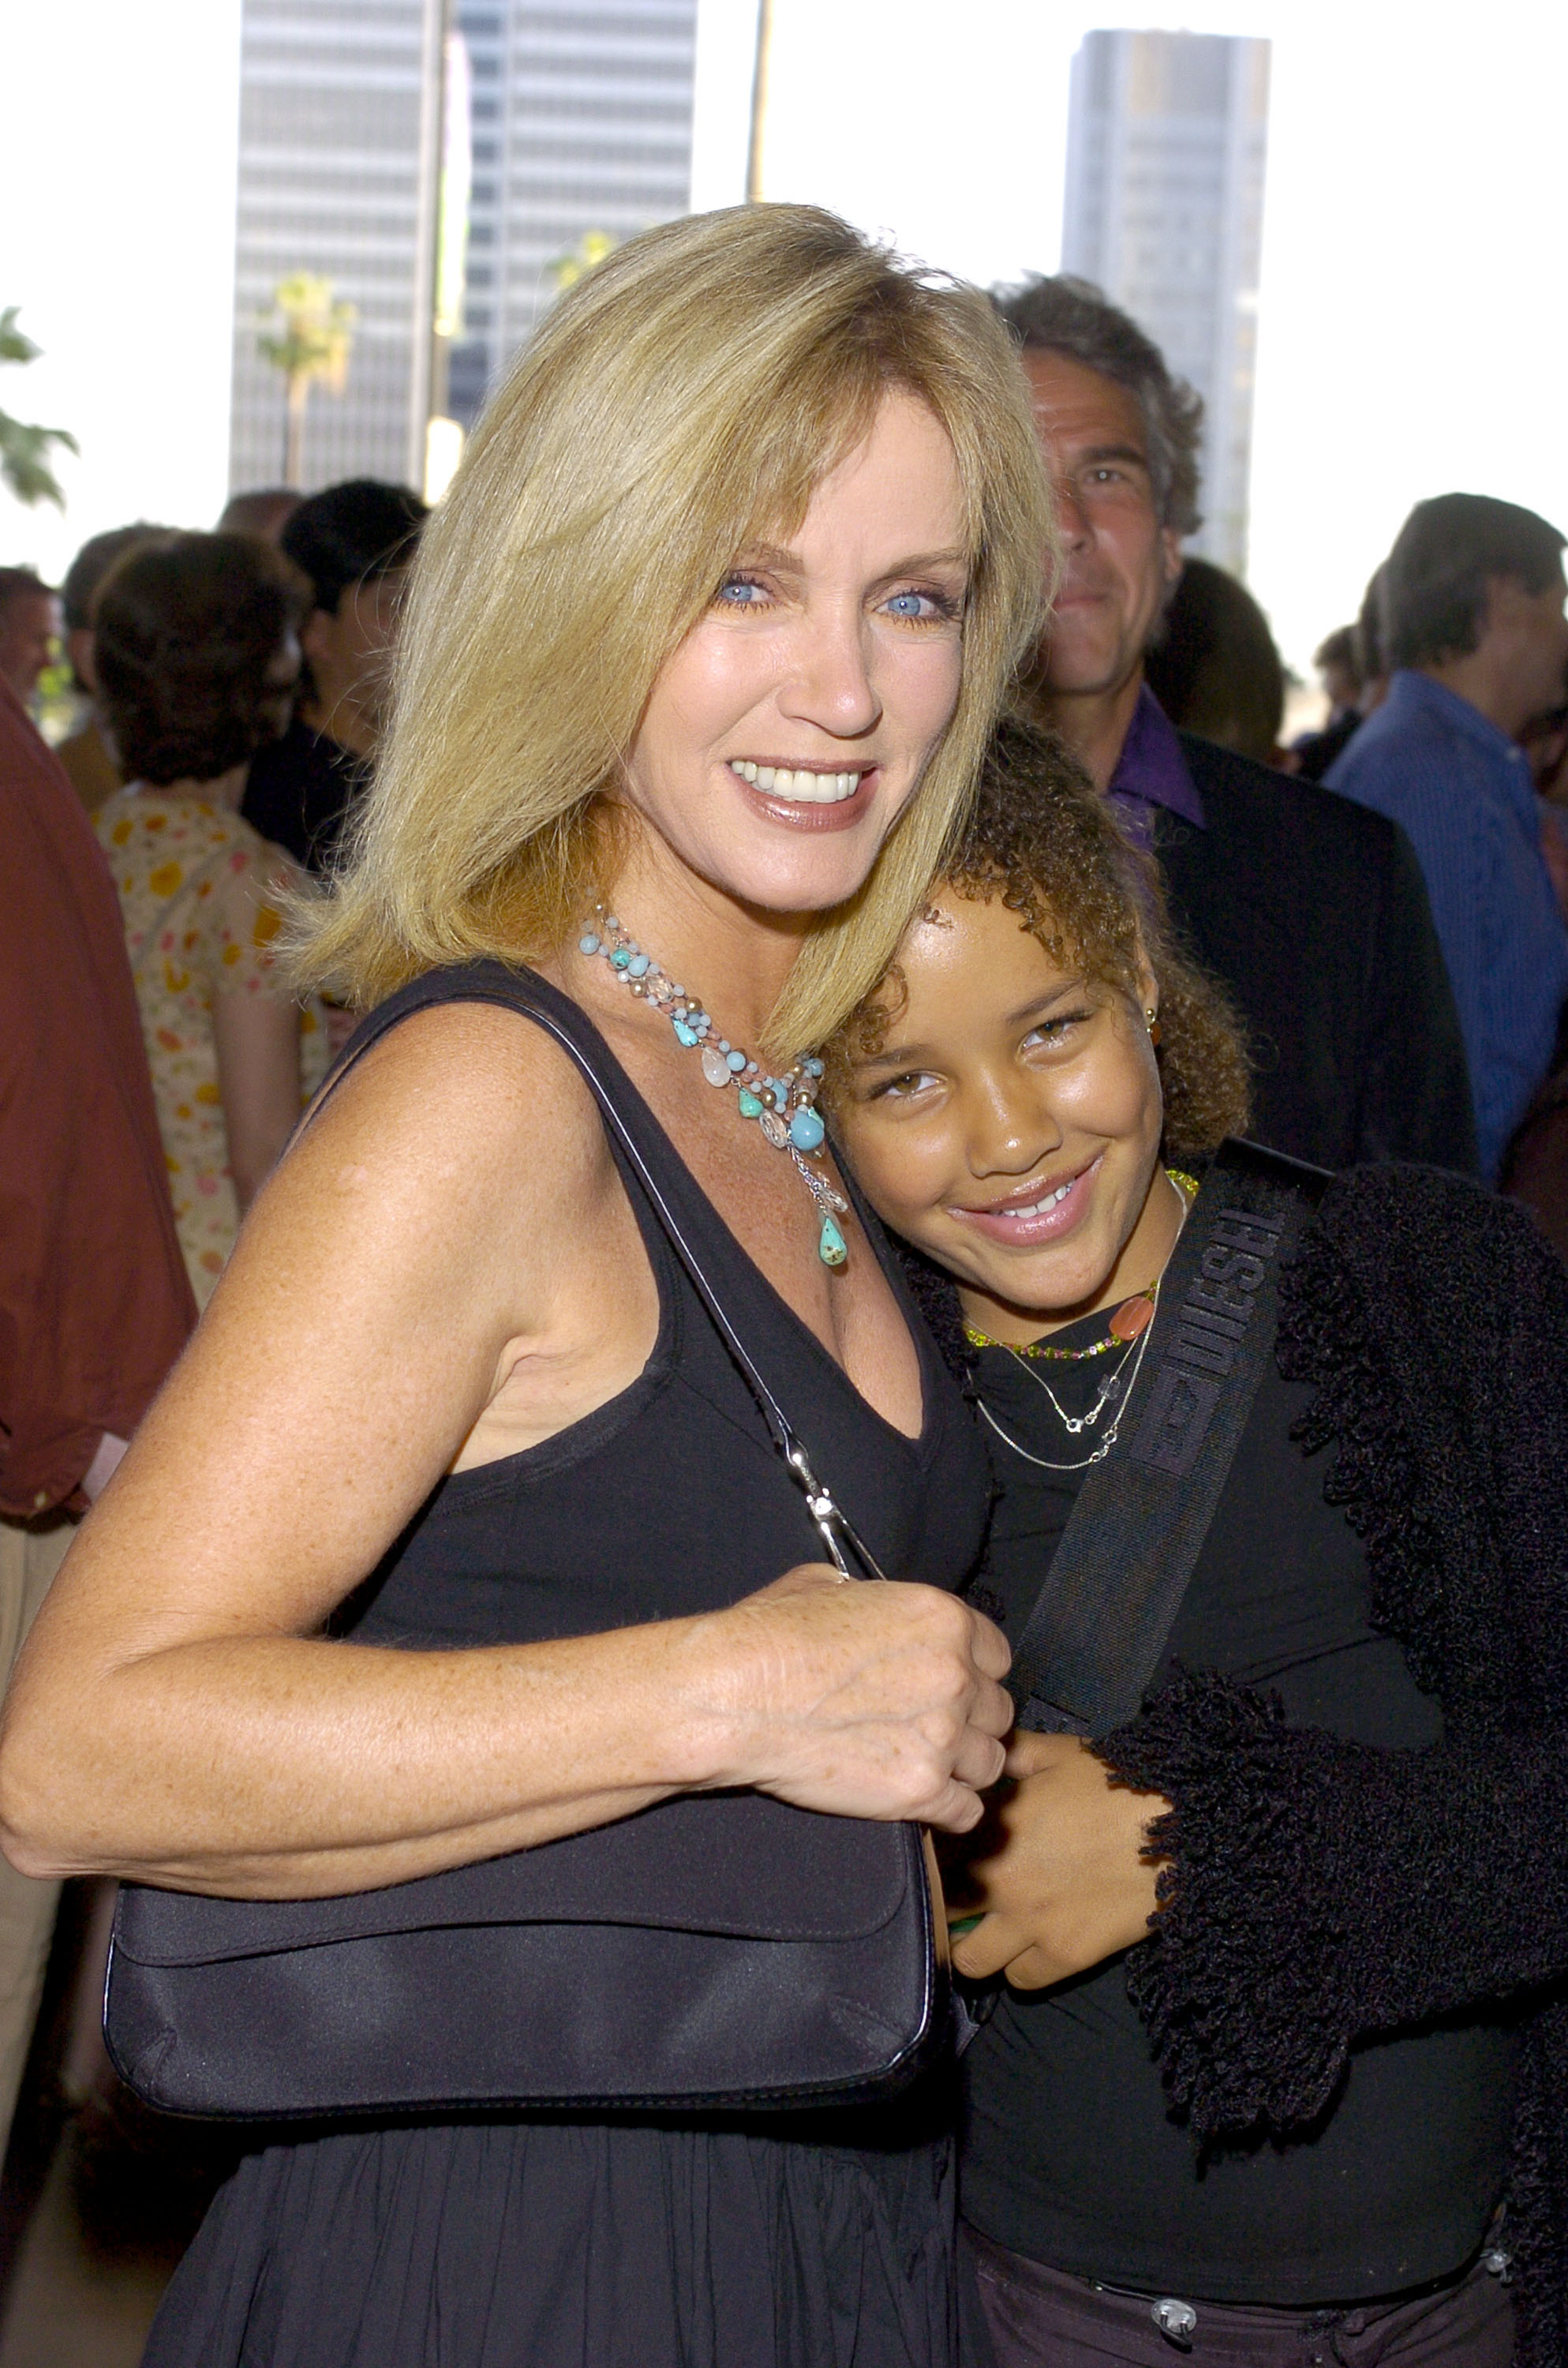 Donna Mills and her daughter Chloe Mills during the Los Angeles premiere of "Mamma Mia!" on April 25, 2004, in Hollywood, California | Source: Getty Images